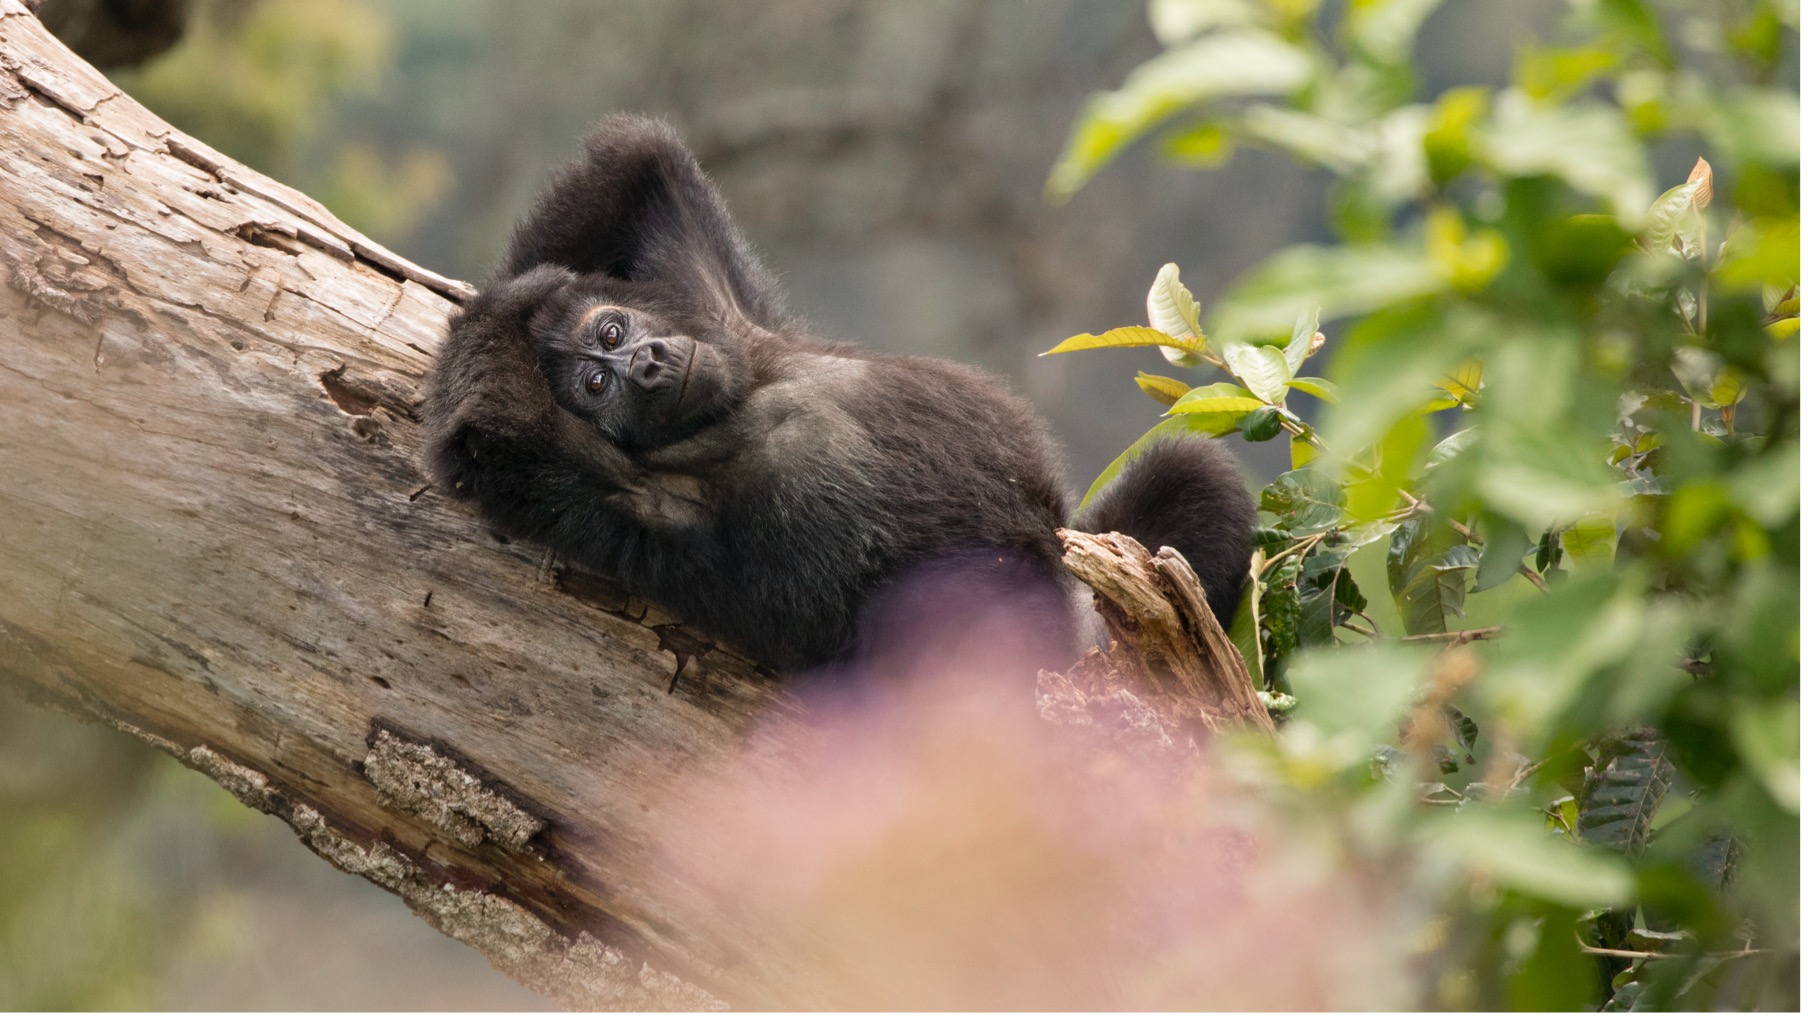 a young gorilla relaxes on a tree